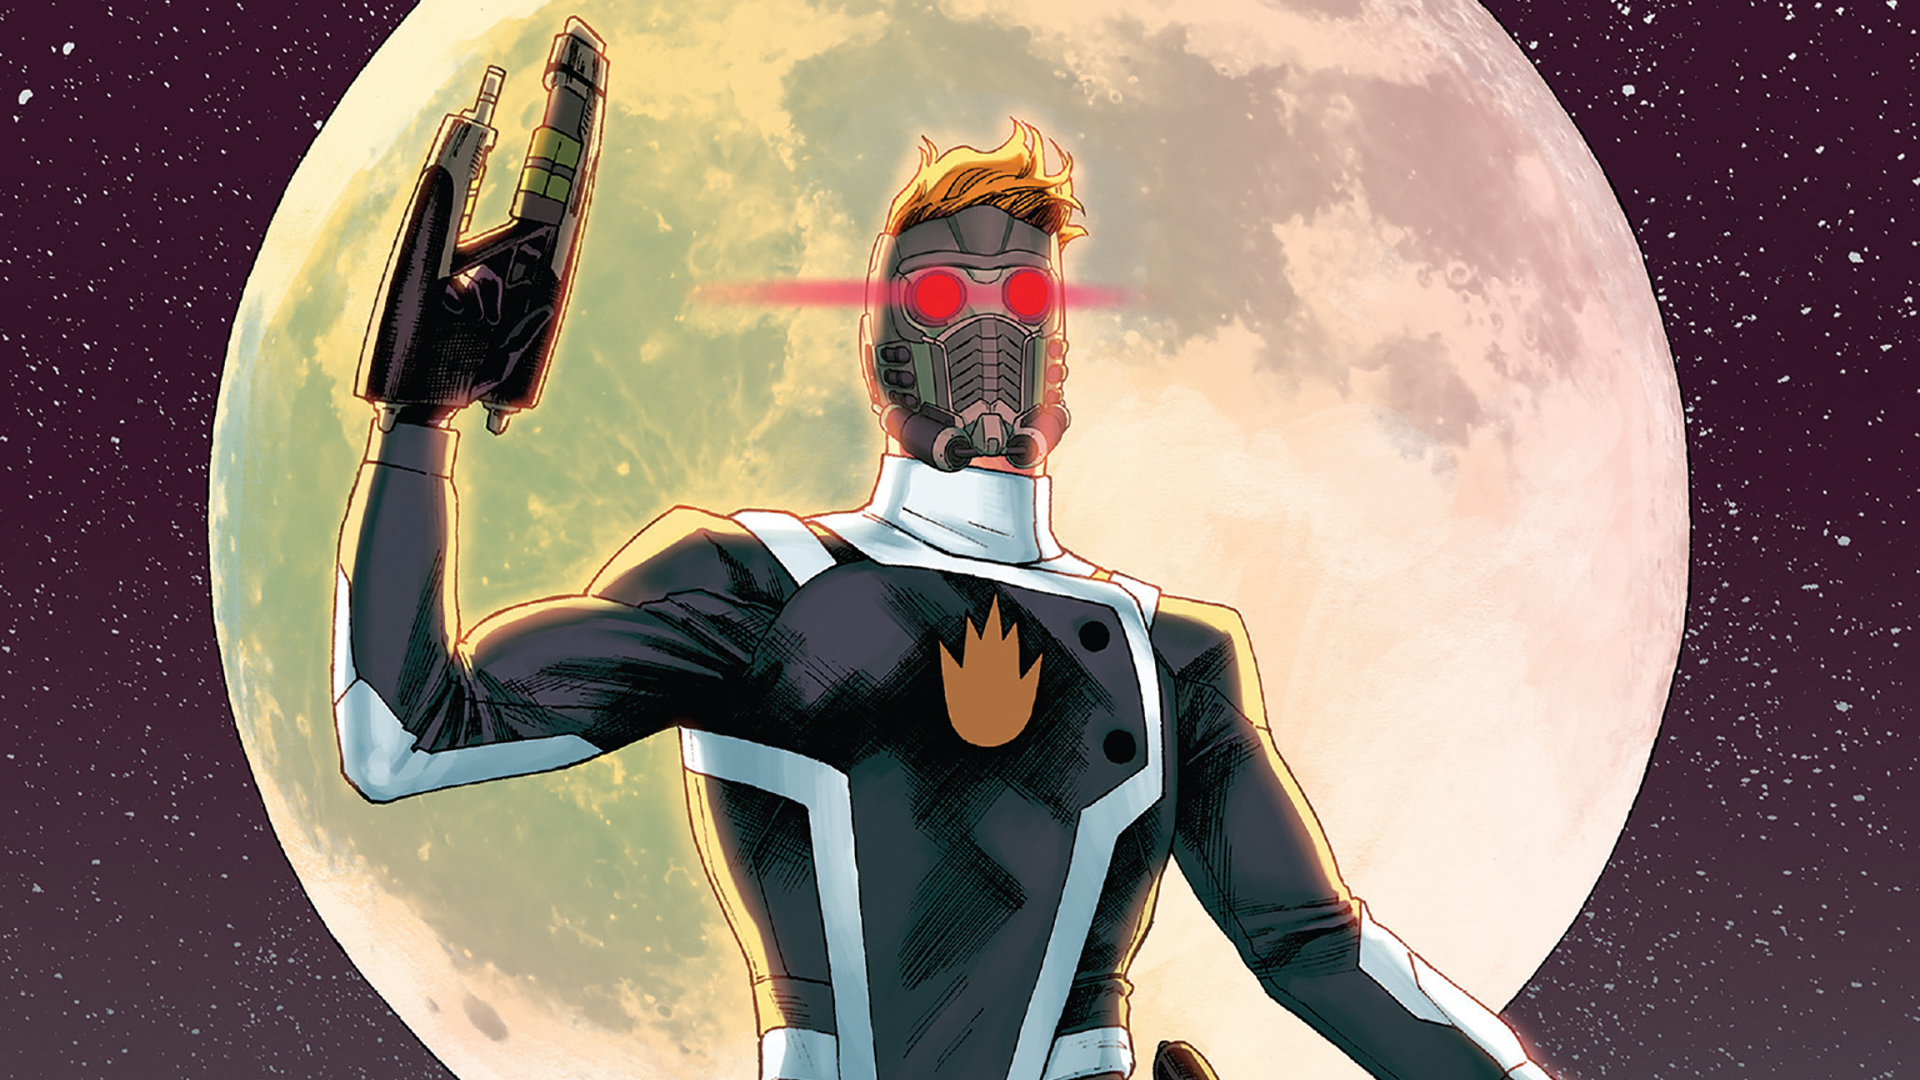 Starlord's new costume.